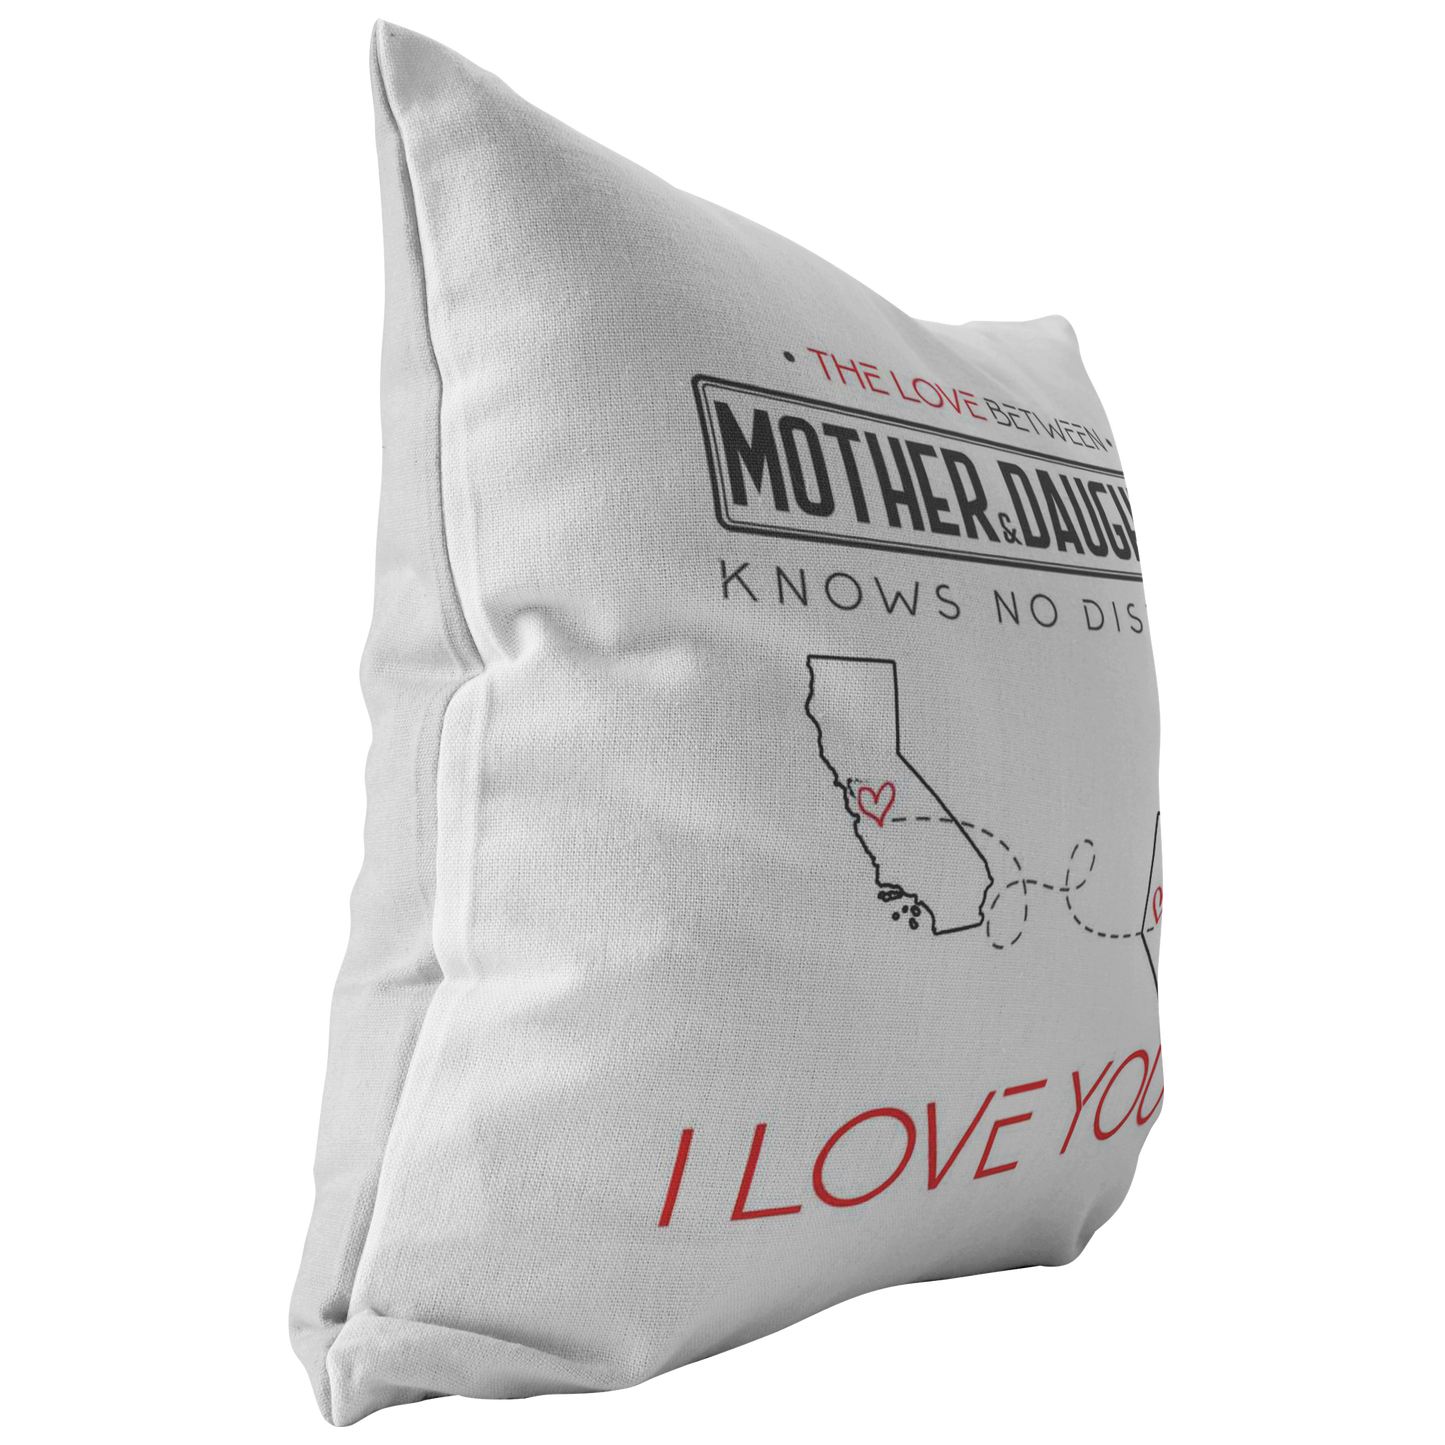 ND-pl20419438-sp-26956 - [ California | Nevada | Mother And Daughter ] (PI_ThrowPillowCovers) Happy Farhers Day, Mothers Day Decoration Personalized - The